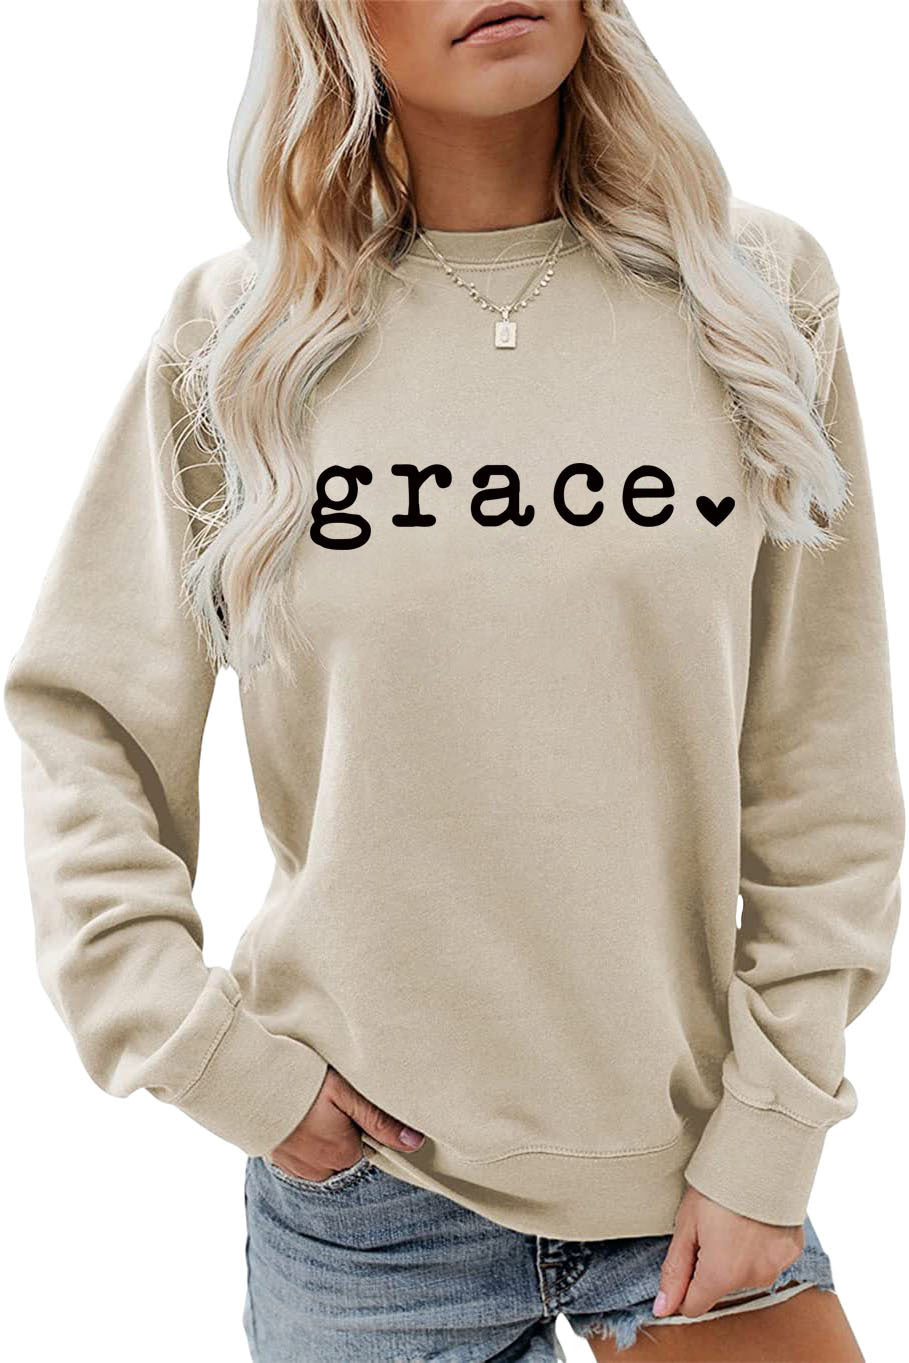 Grace Love Letter Graphic Loose Autumn Winter Bottoming Casual Top Long Sleeve Sweater Women